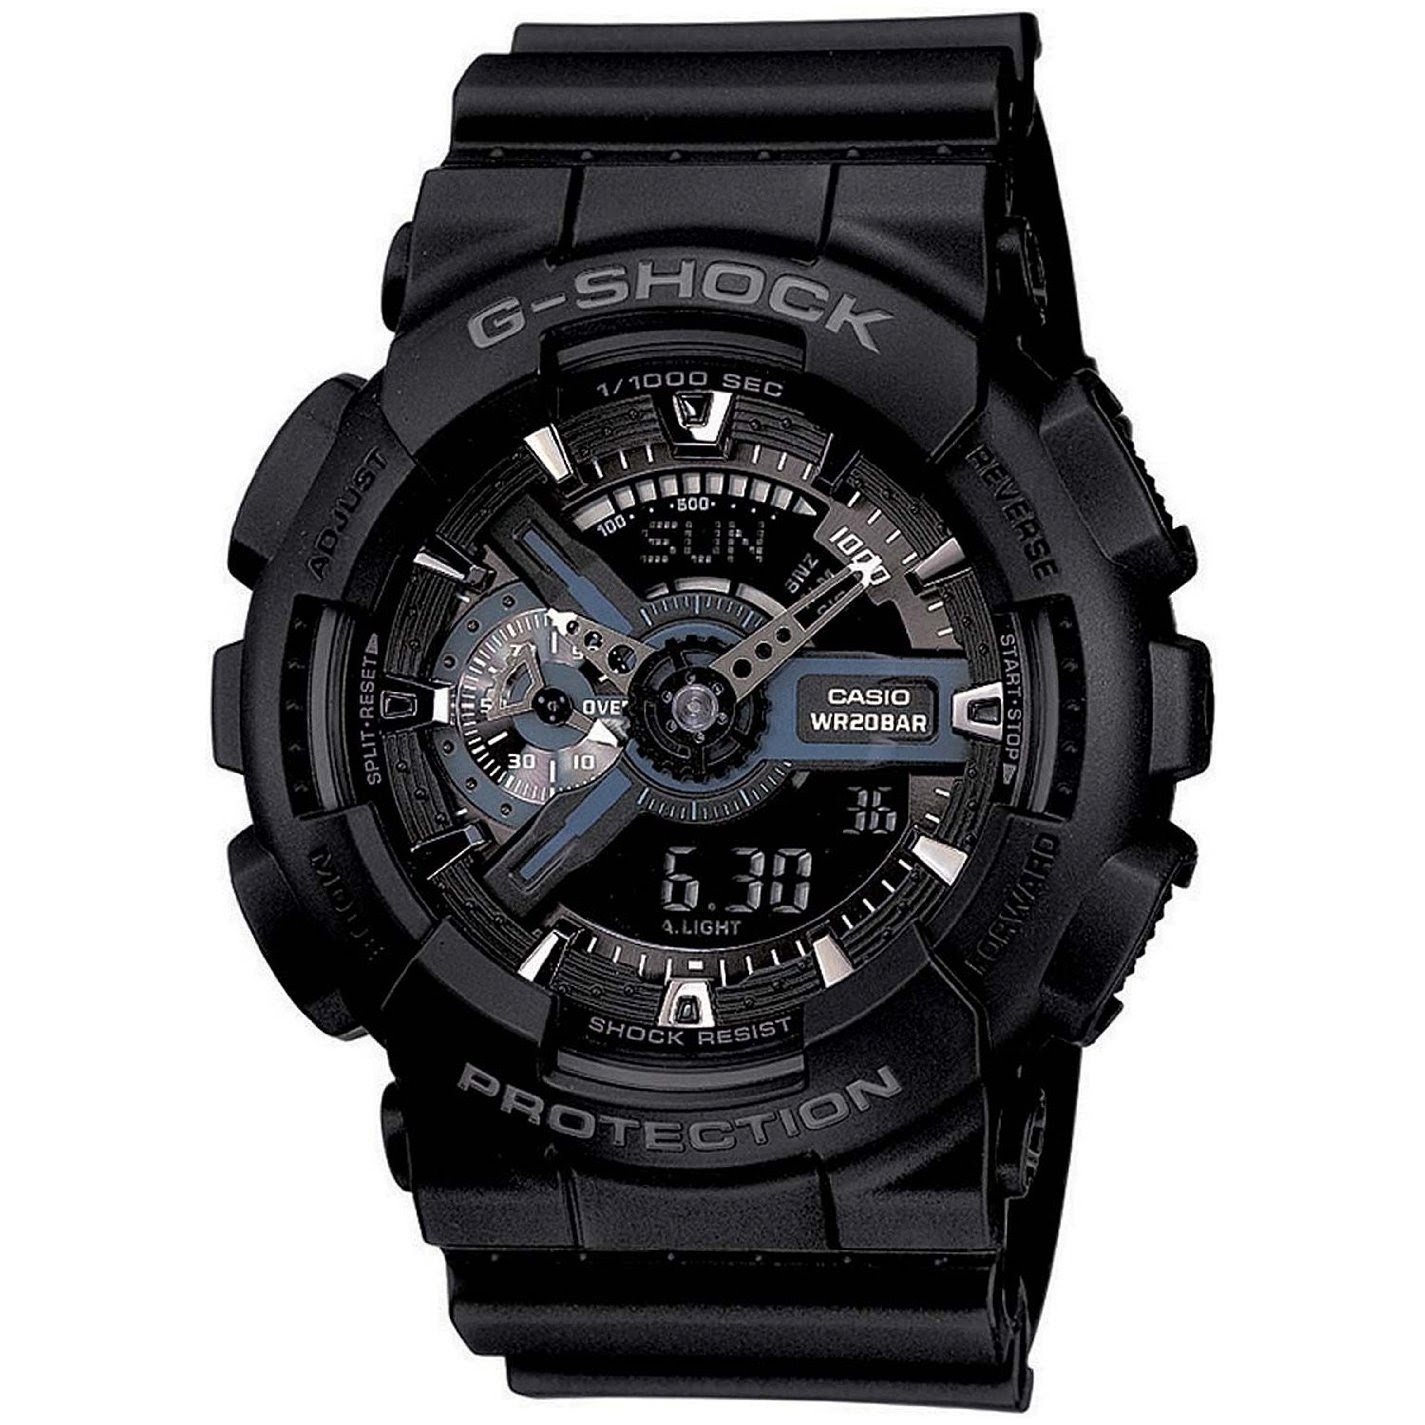 Casio G Shock Protection Price - World famous watches 